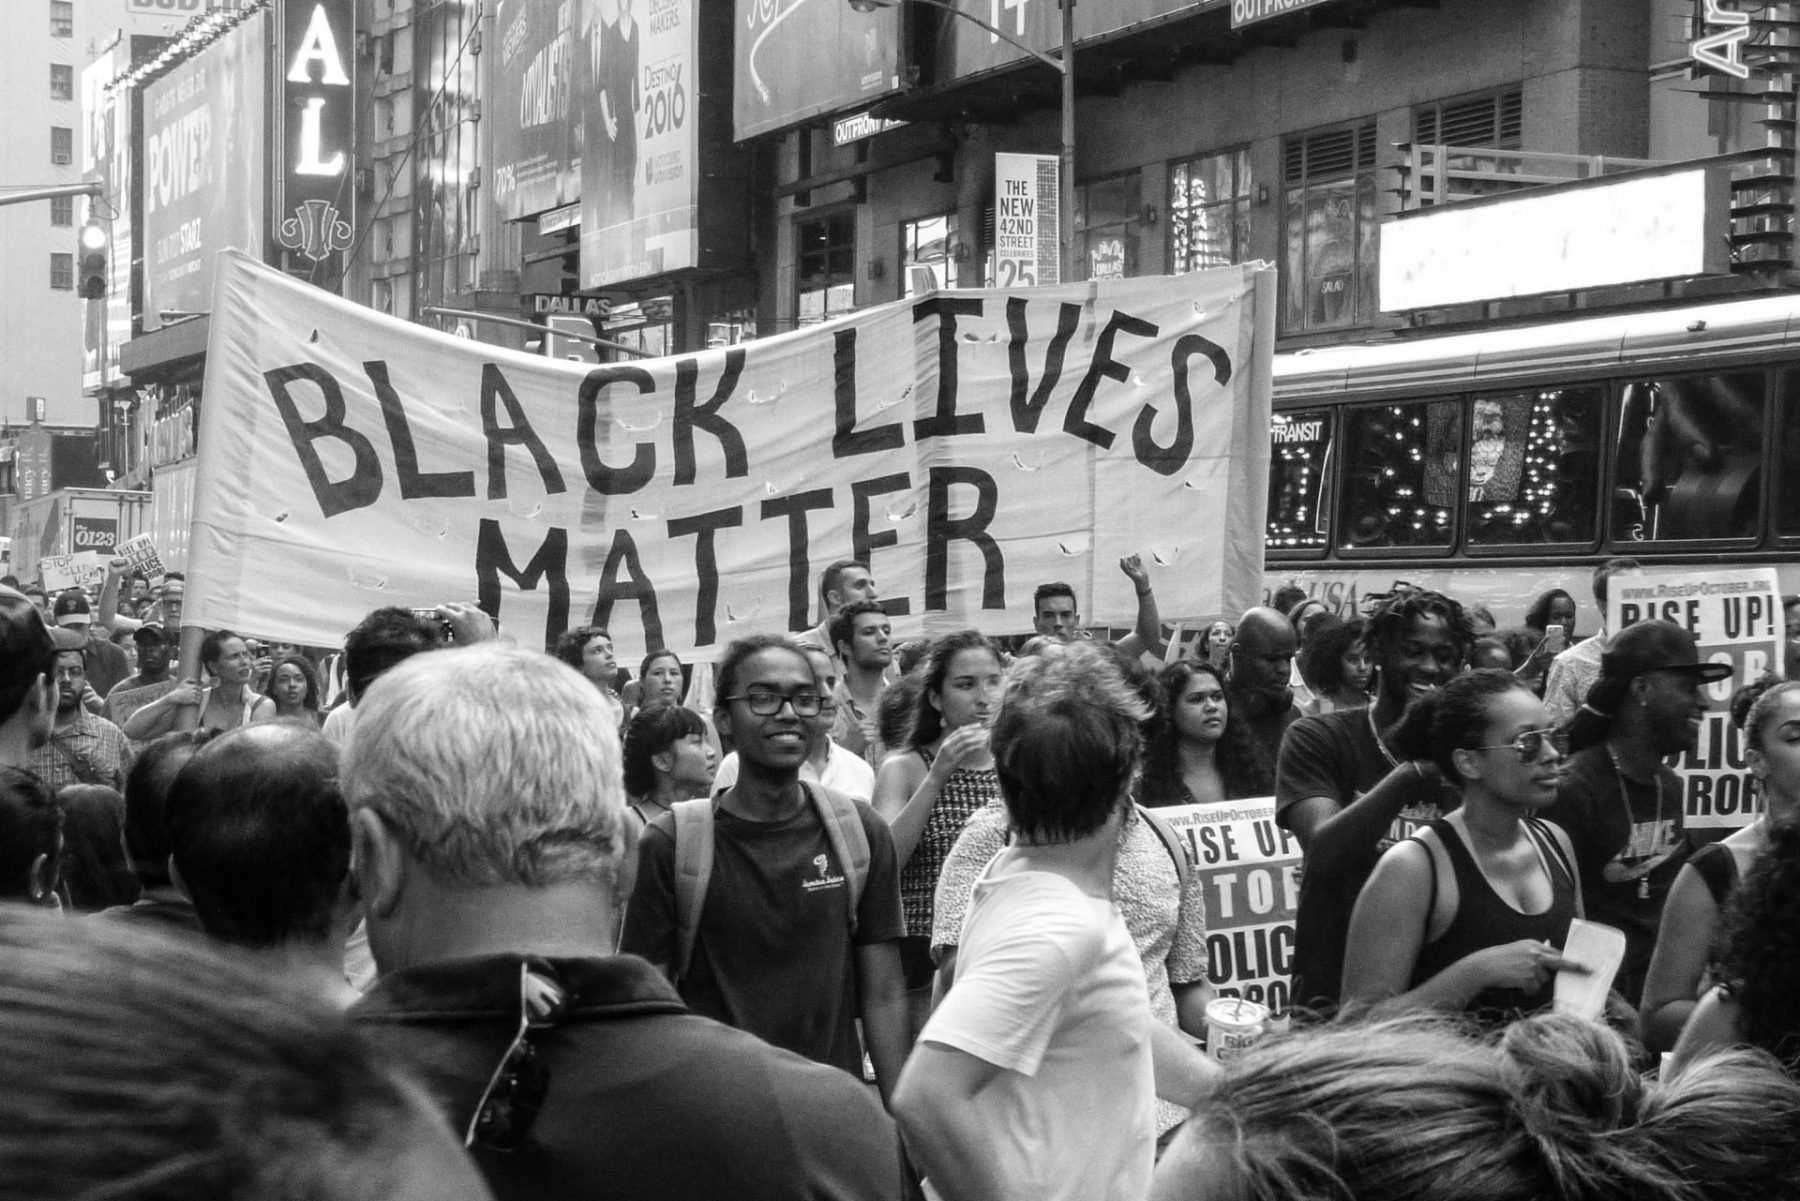 Protesters march alongside a "Black Lives Matter" banner at one of many protests across the globe